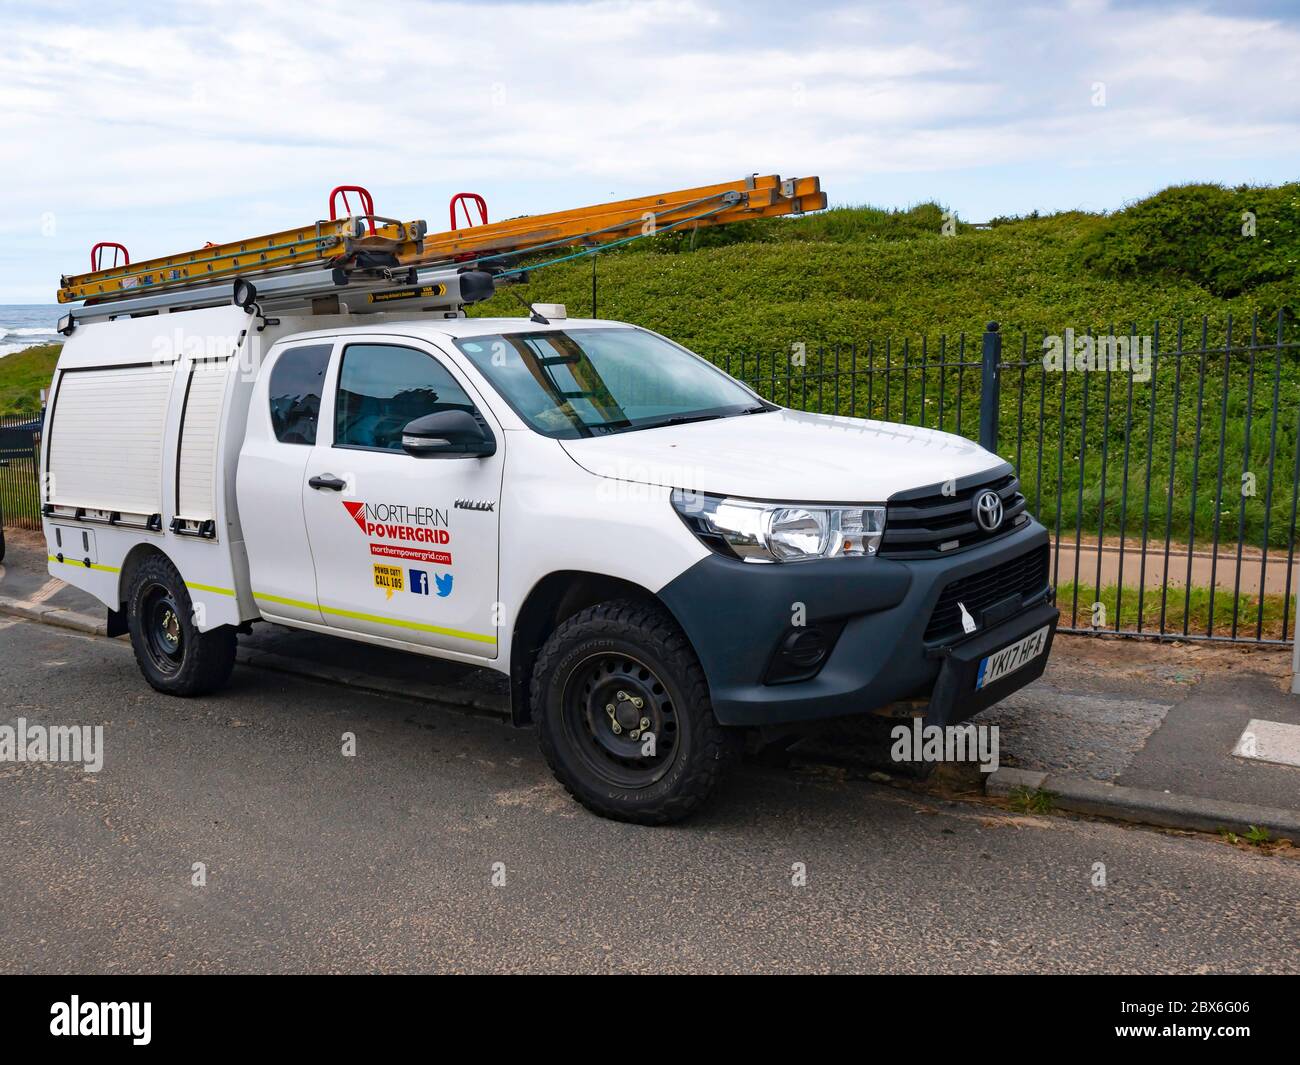 A Toyota Hilux 4x4 truck owned by Northern Powergrid resposible for maintenance of the electrical power distribution system in Northern England equipp Stock Photo